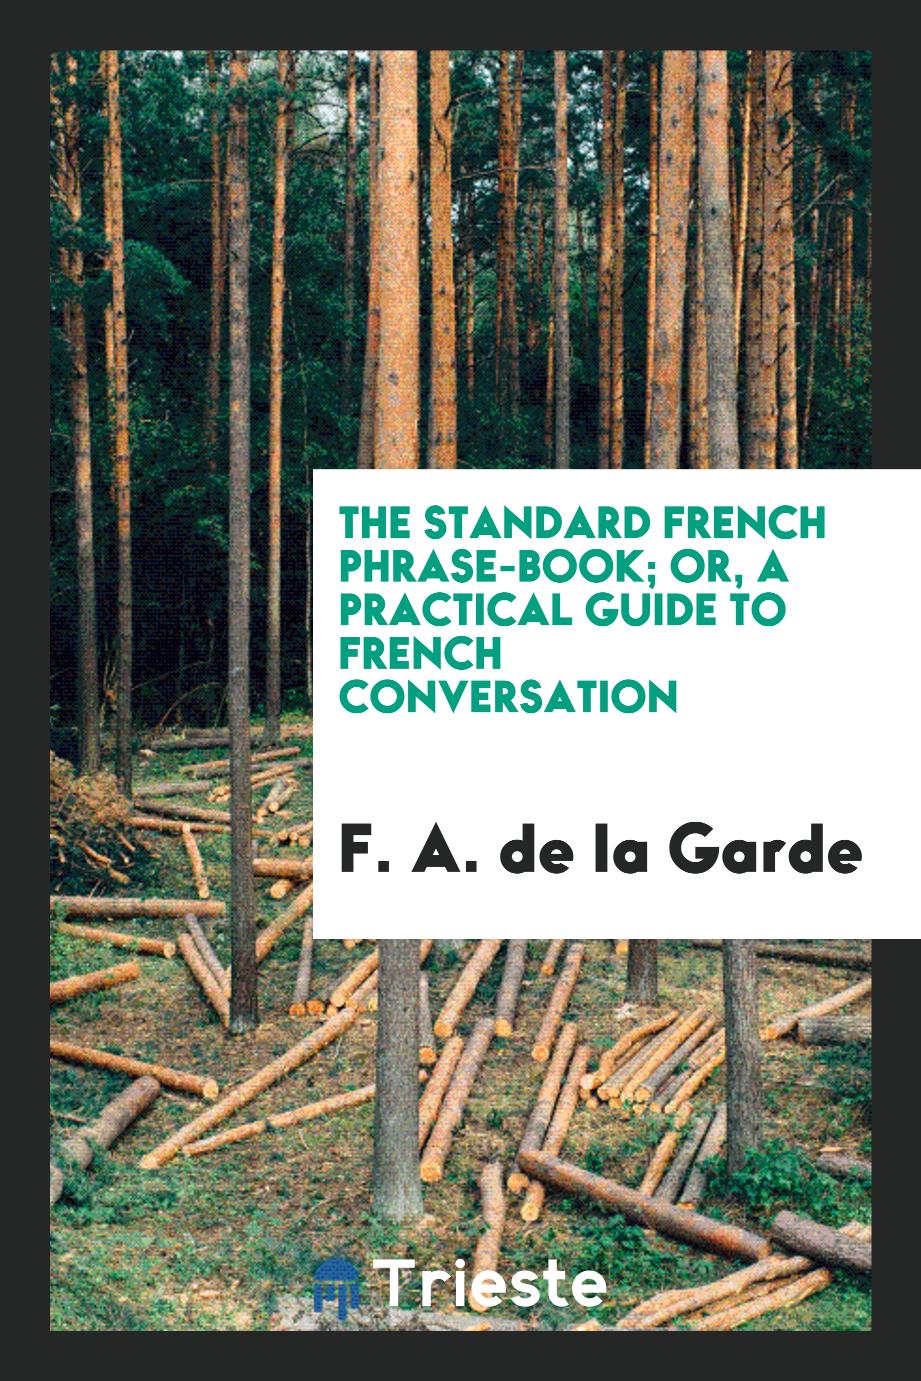 The Standard French Phrase-Book; Or, a Practical Guide to French Conversation